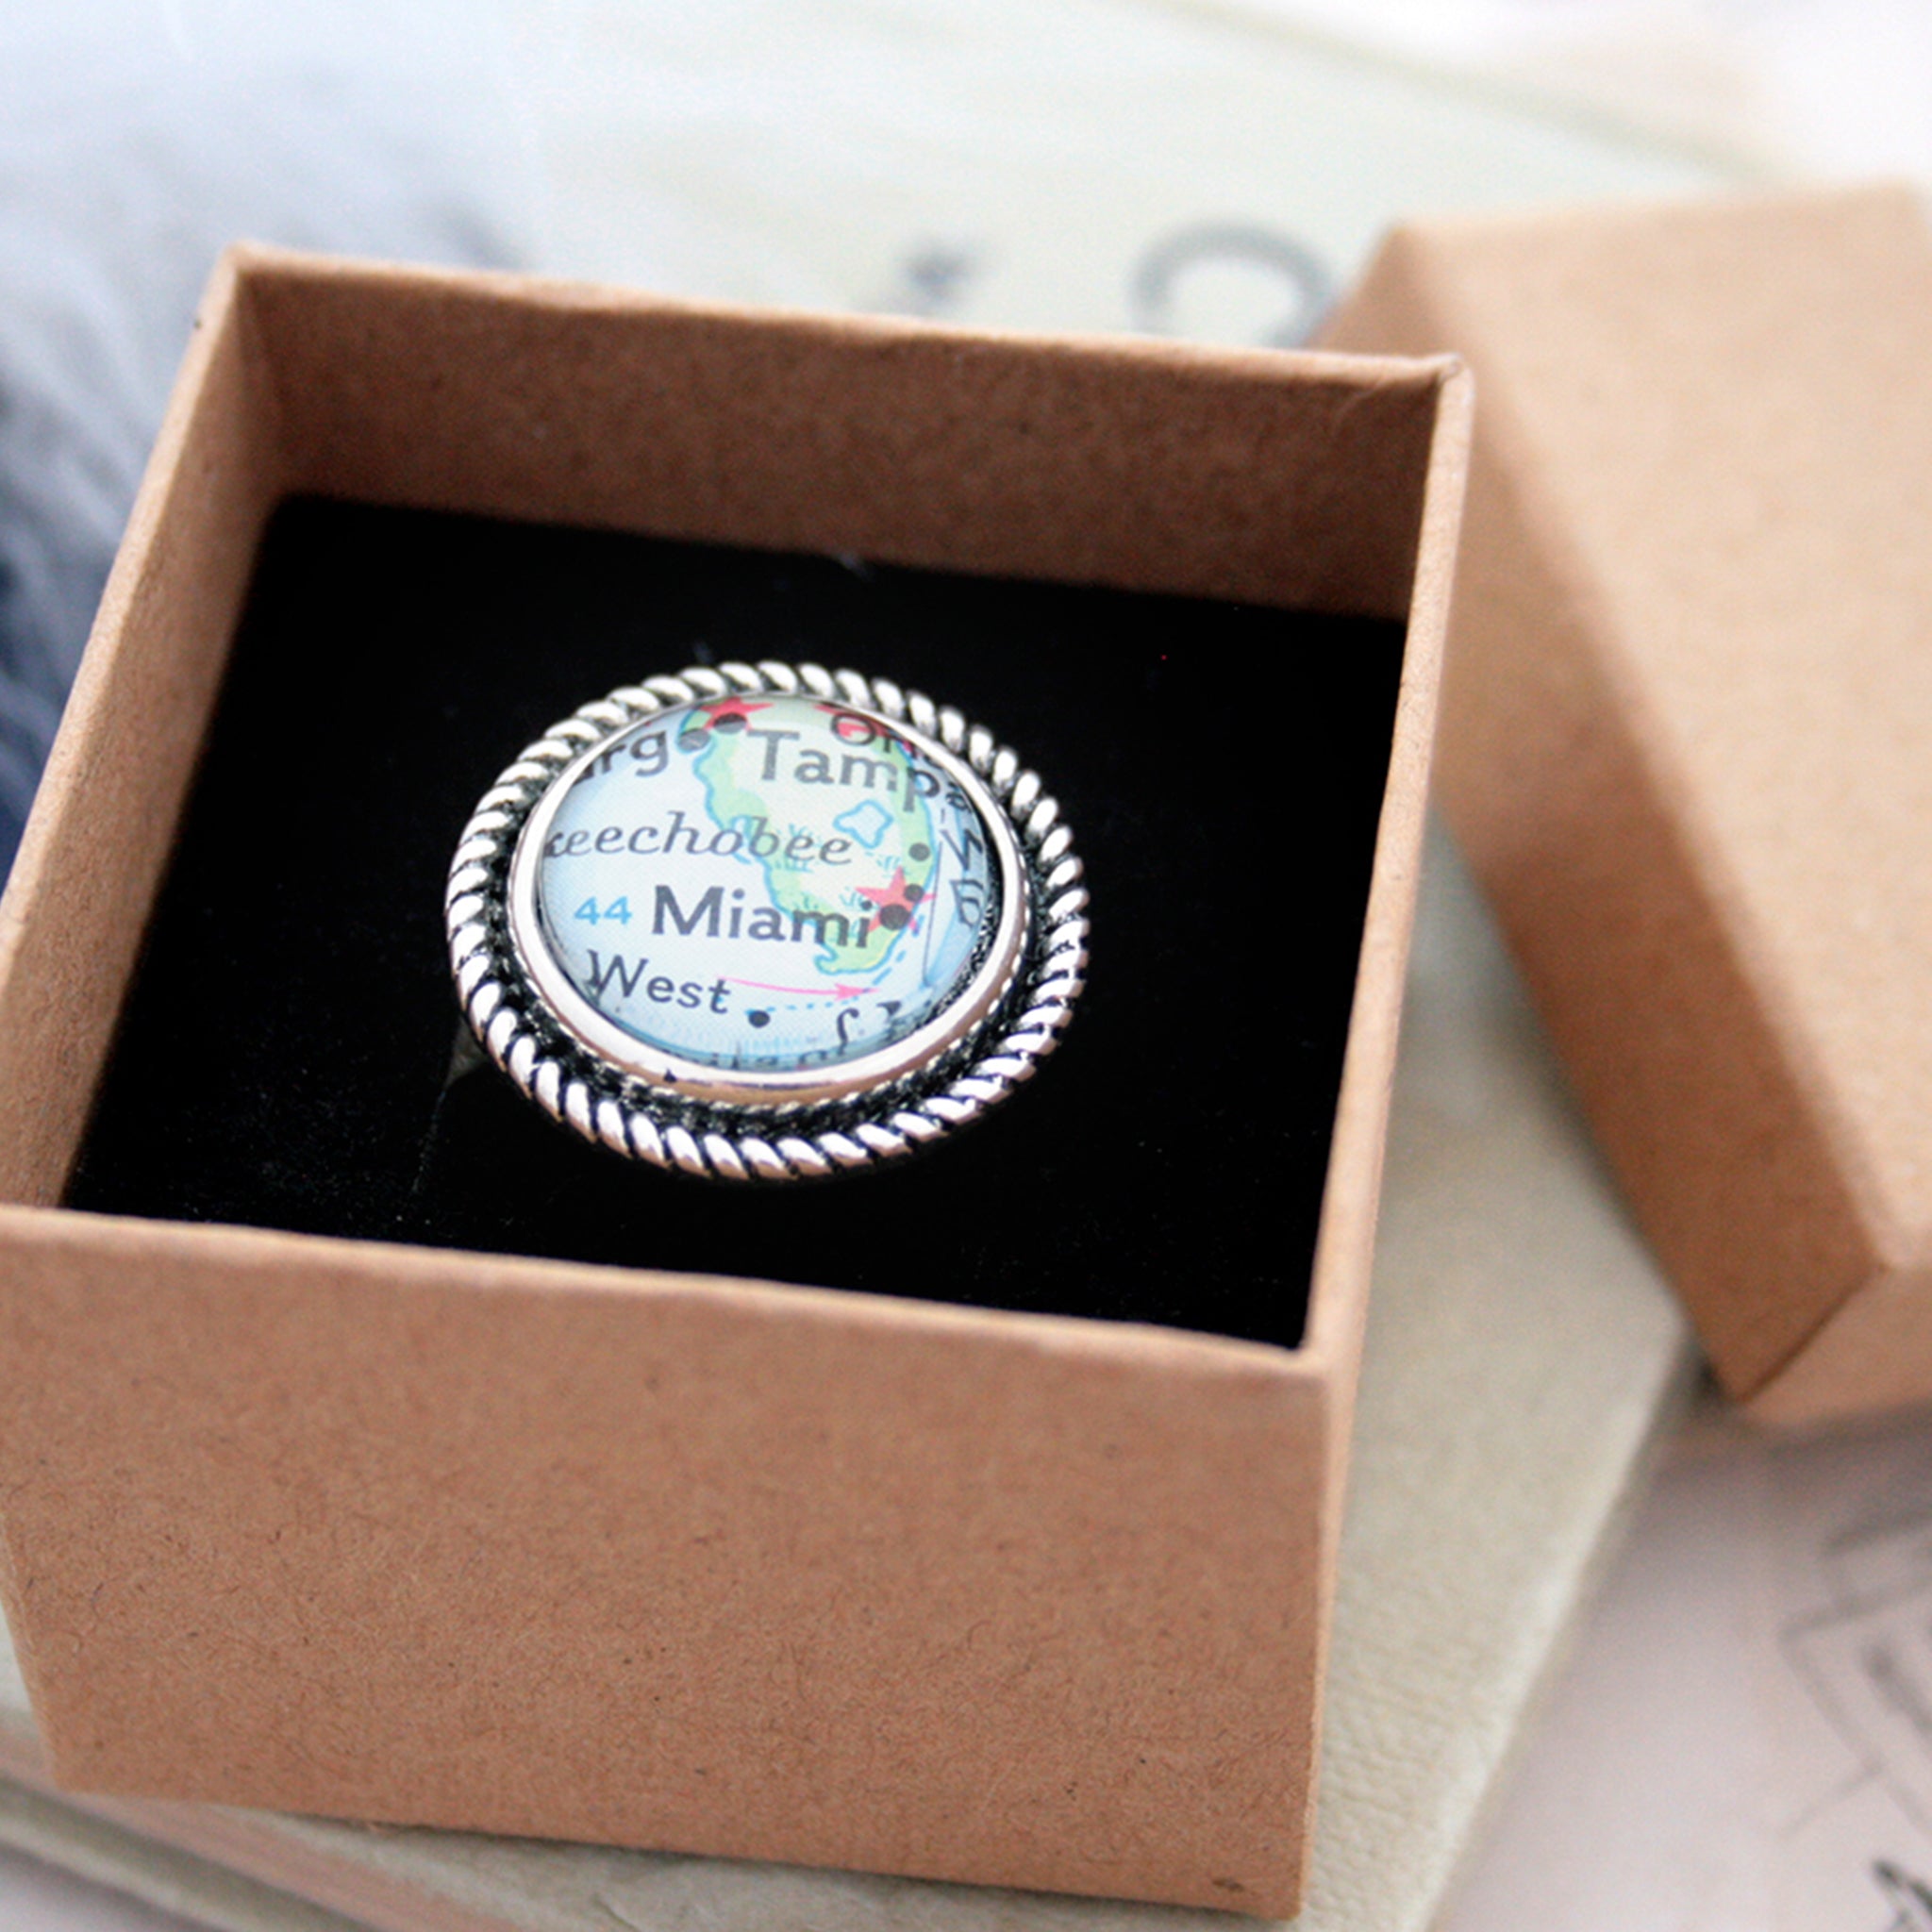 Silver tone ring with rope pattern featuring map of Miami in a box